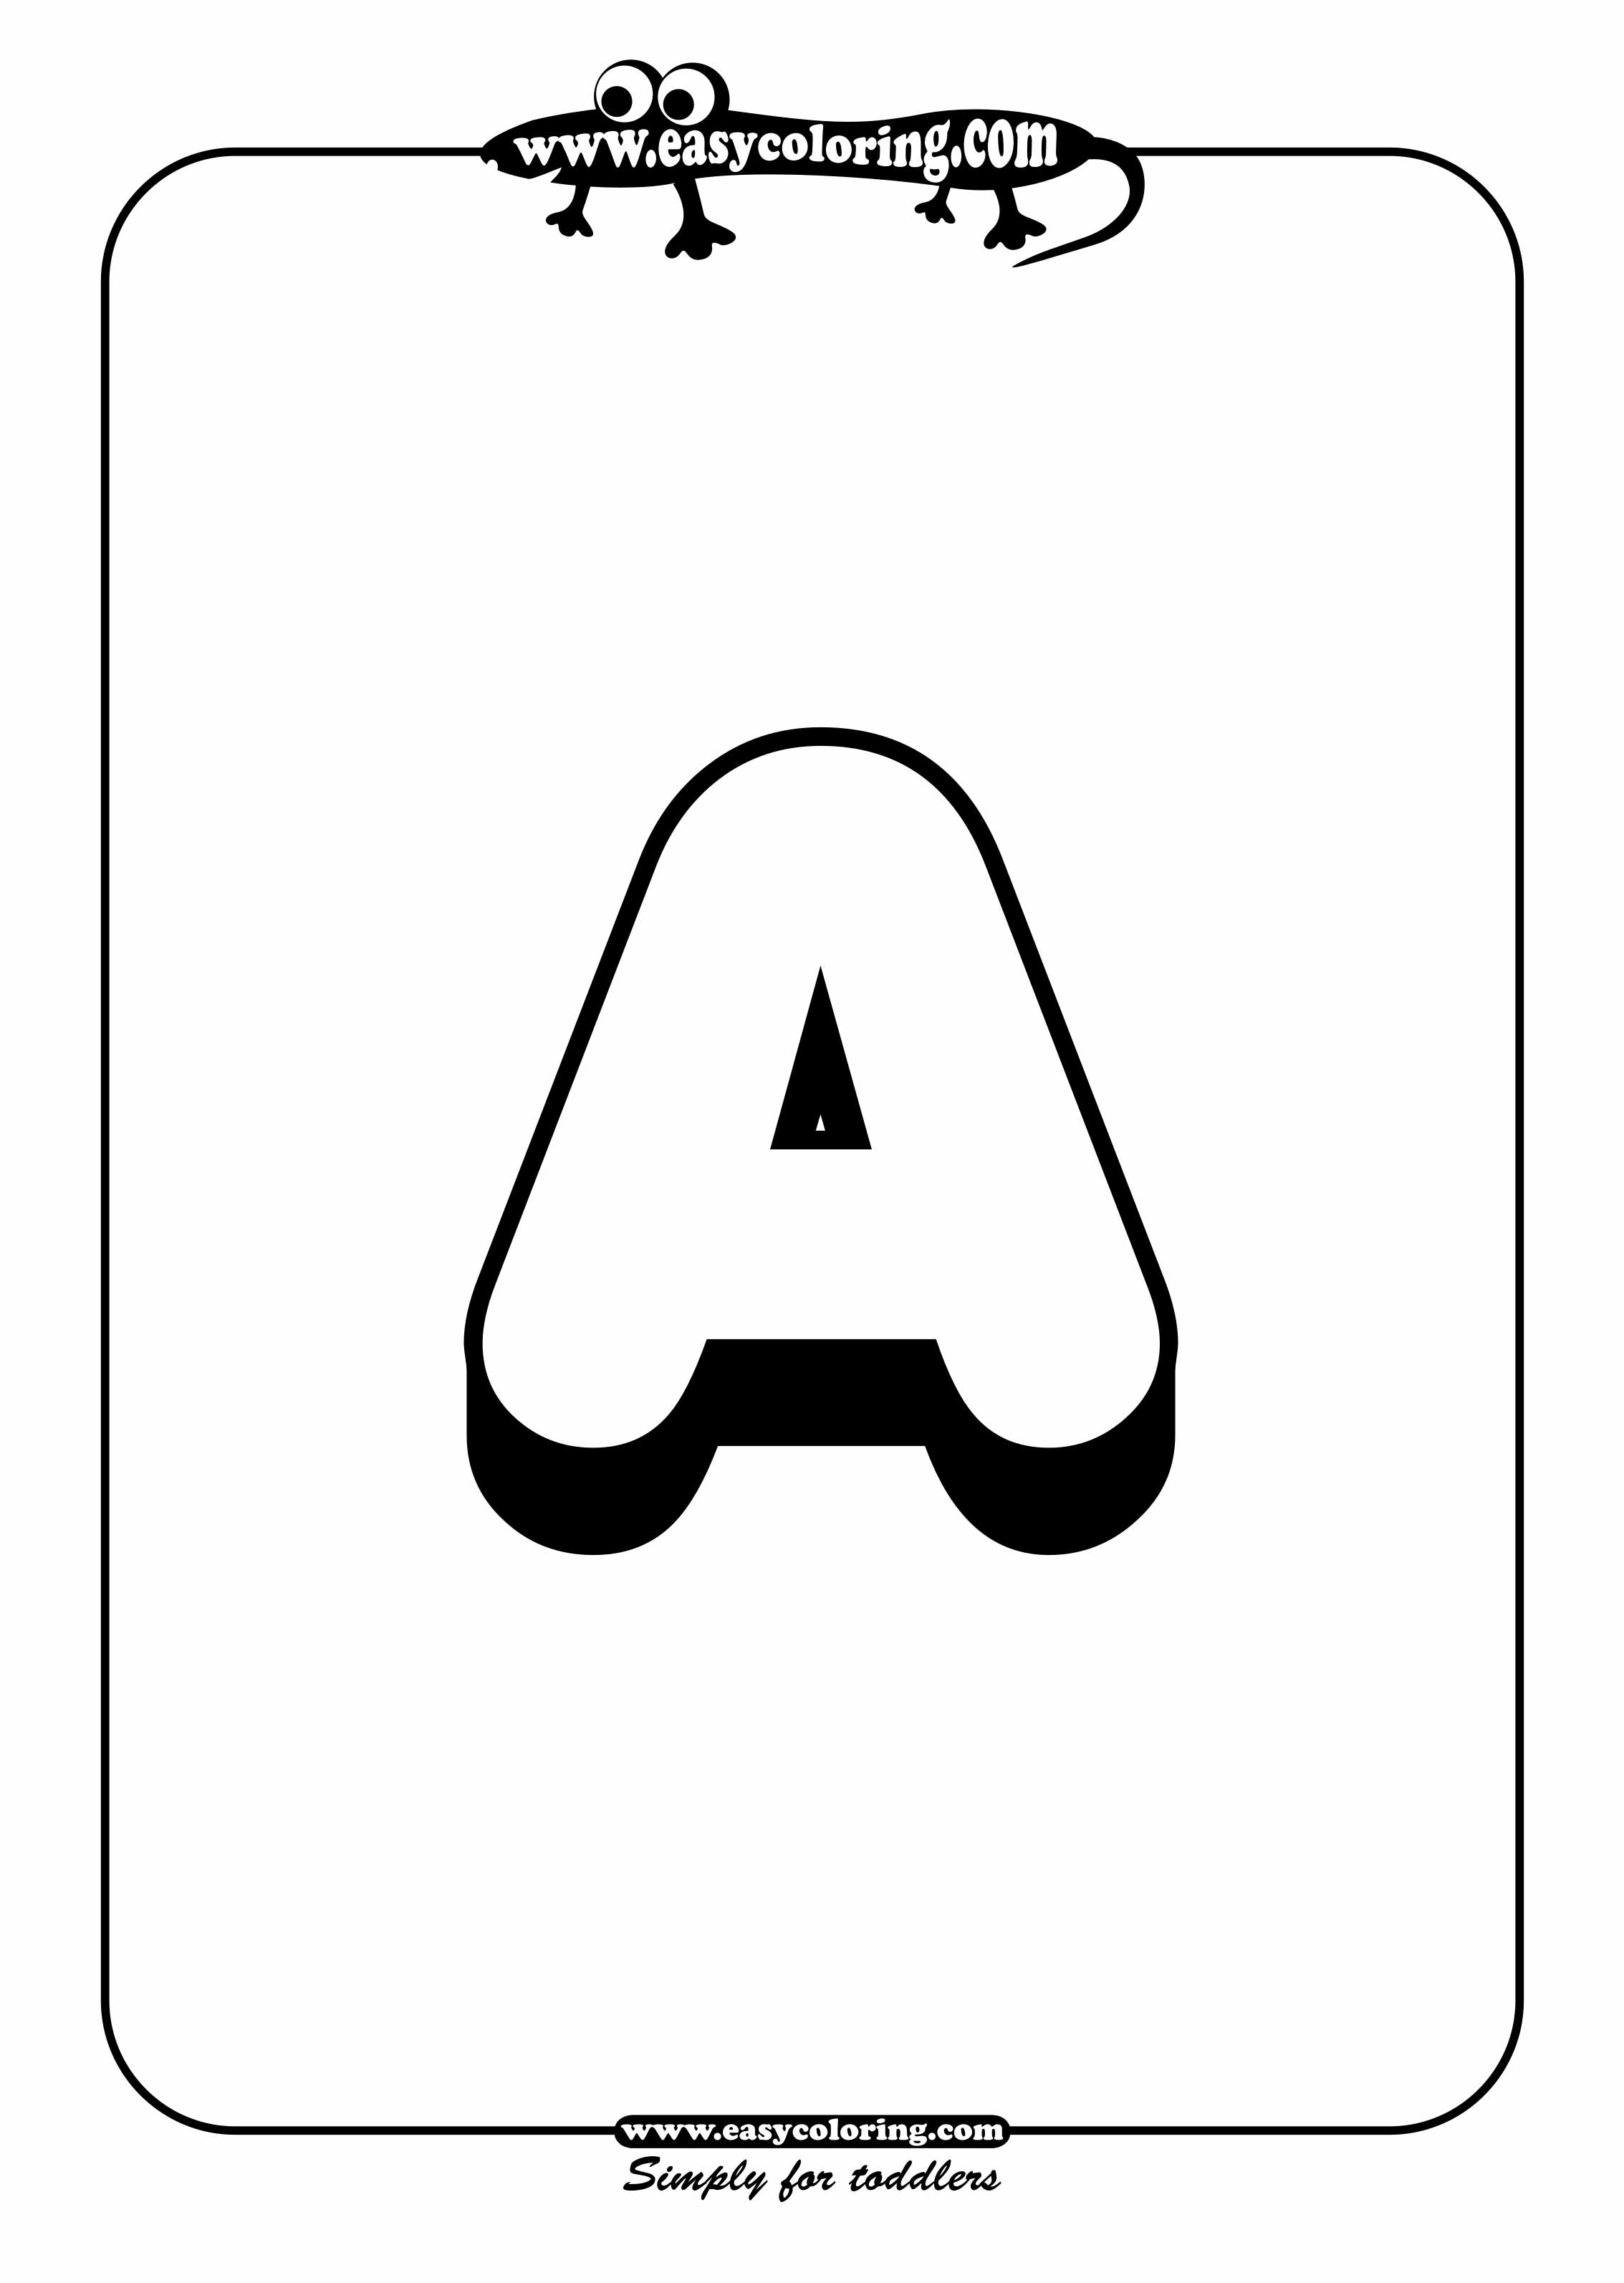 free printable individual alphabet letters big letter a simple